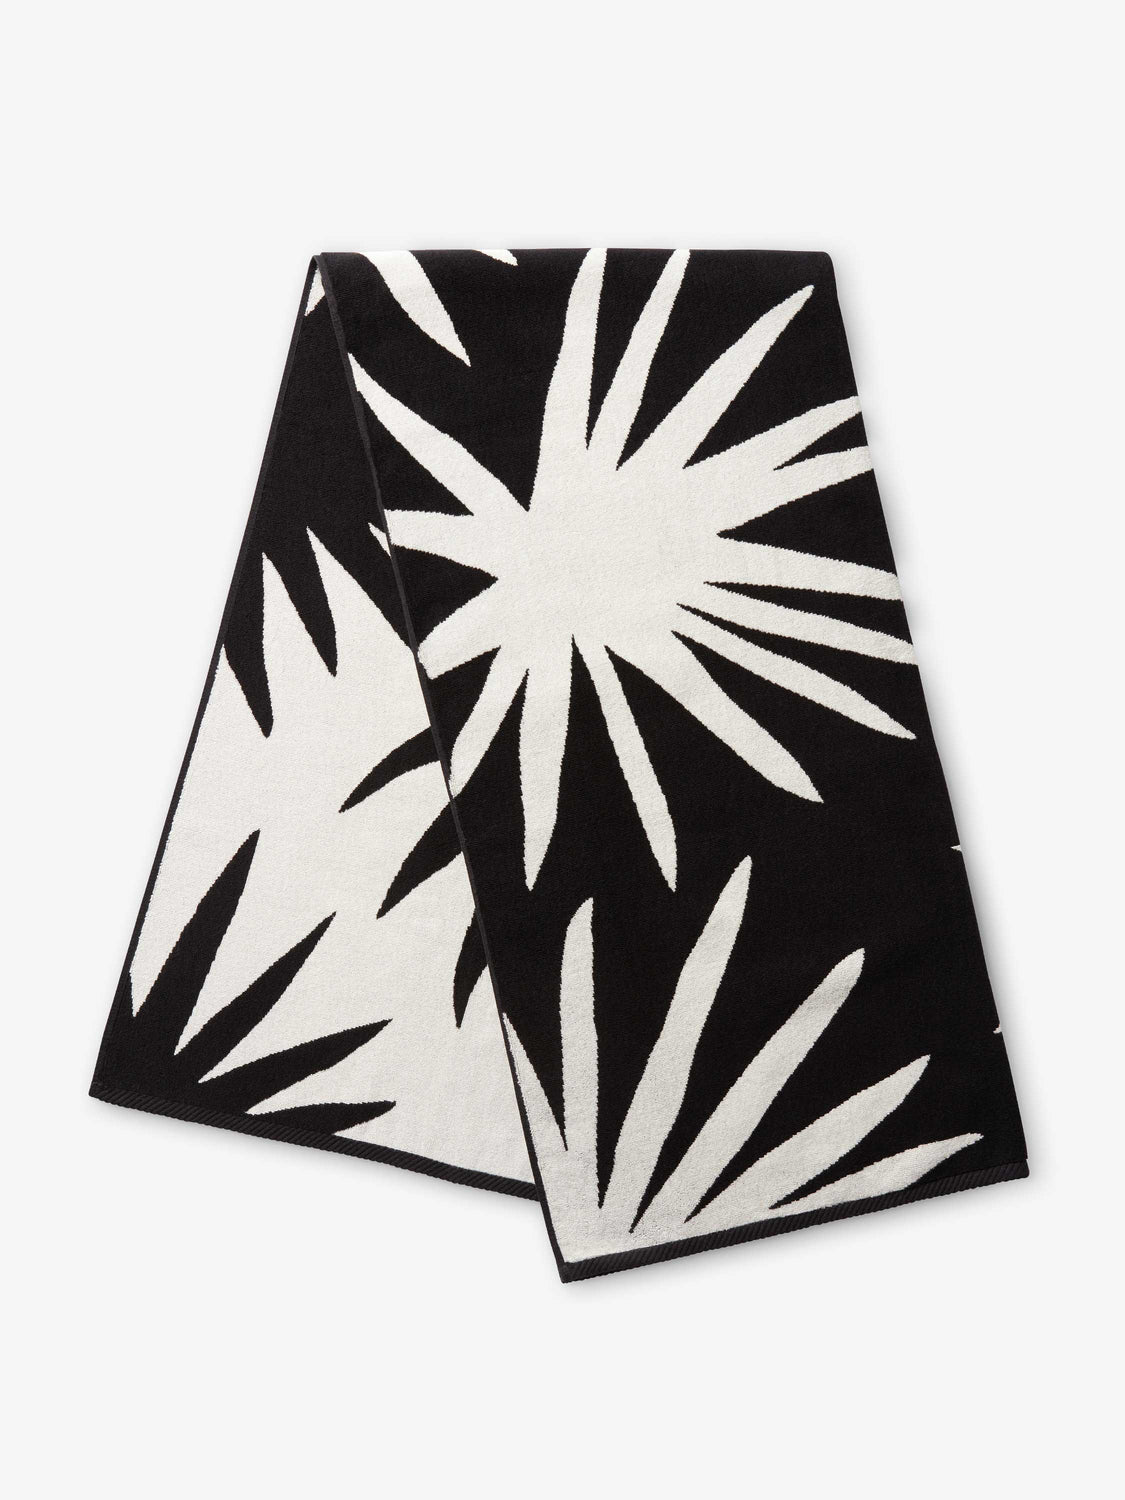 A folded black and ivory white tropical patterned cabana beach towel.